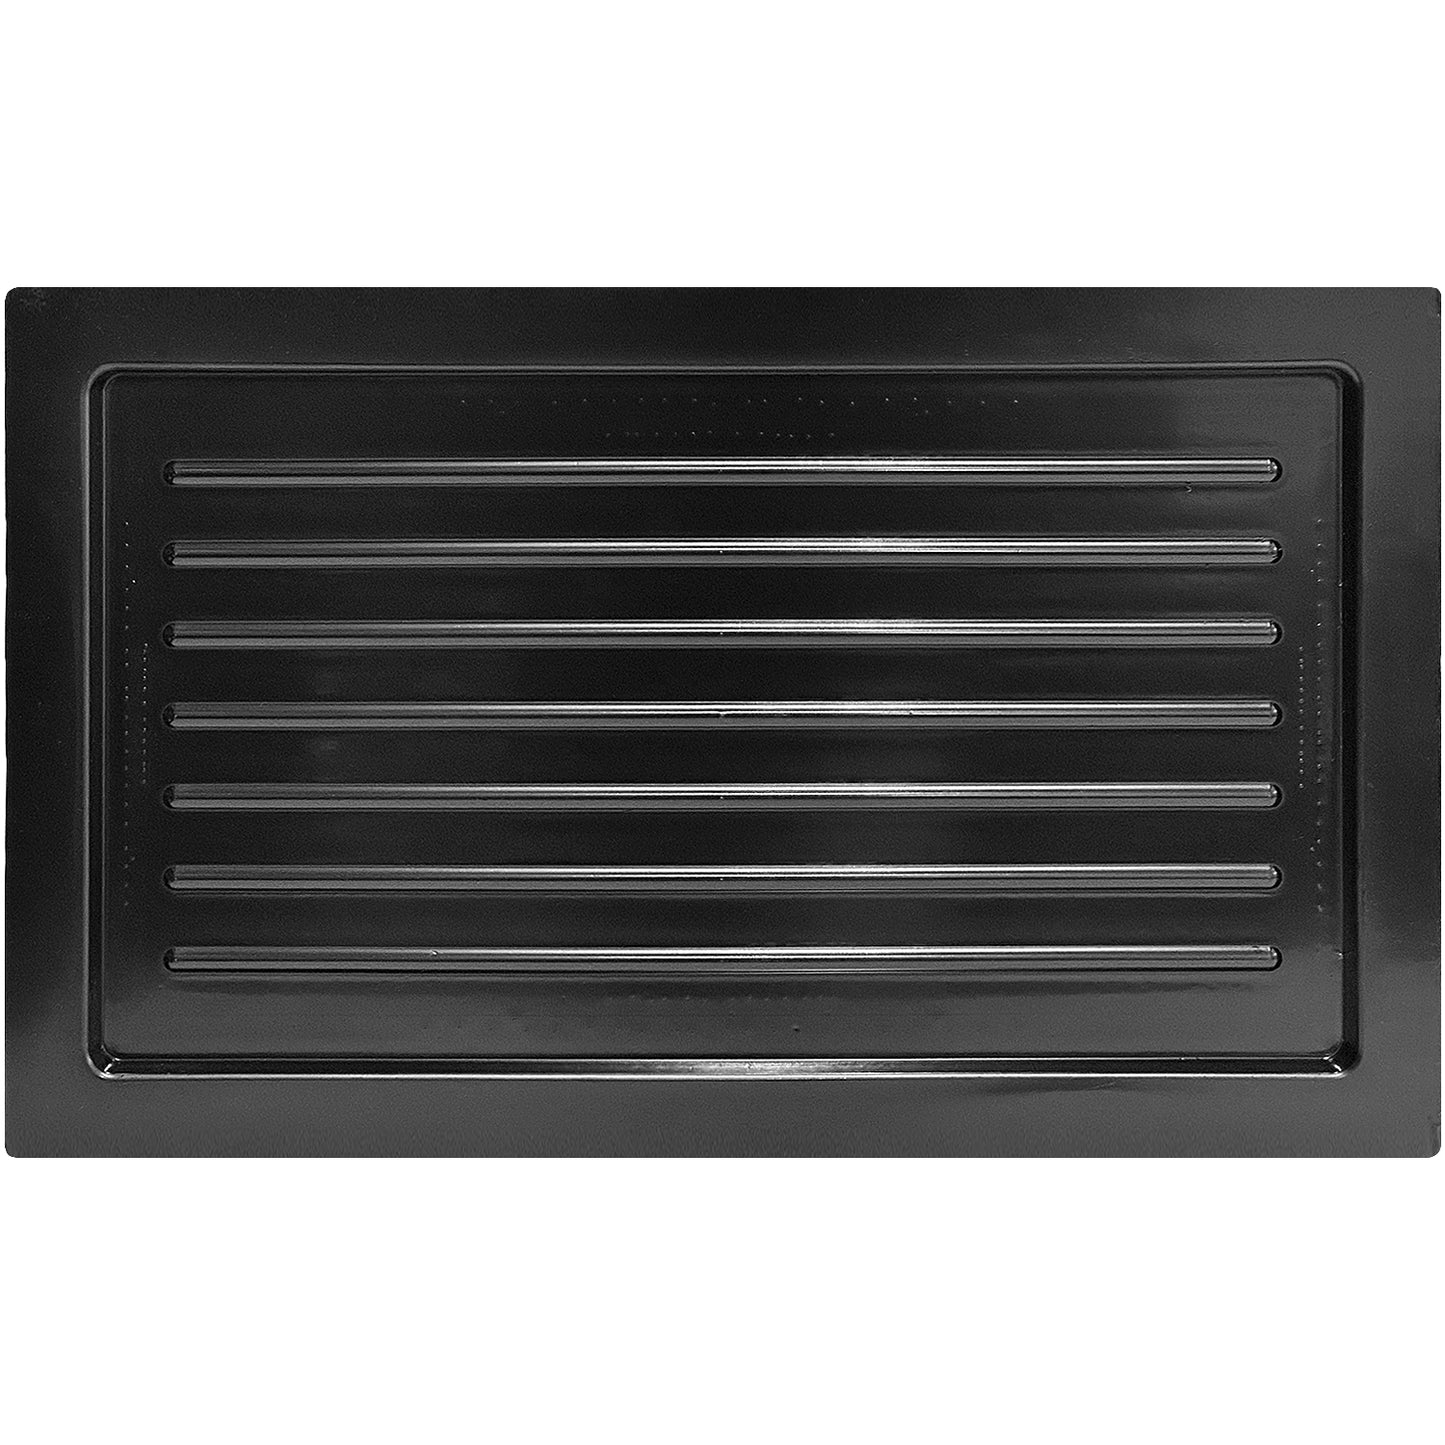 Back of large outward mounted vent cover (black)